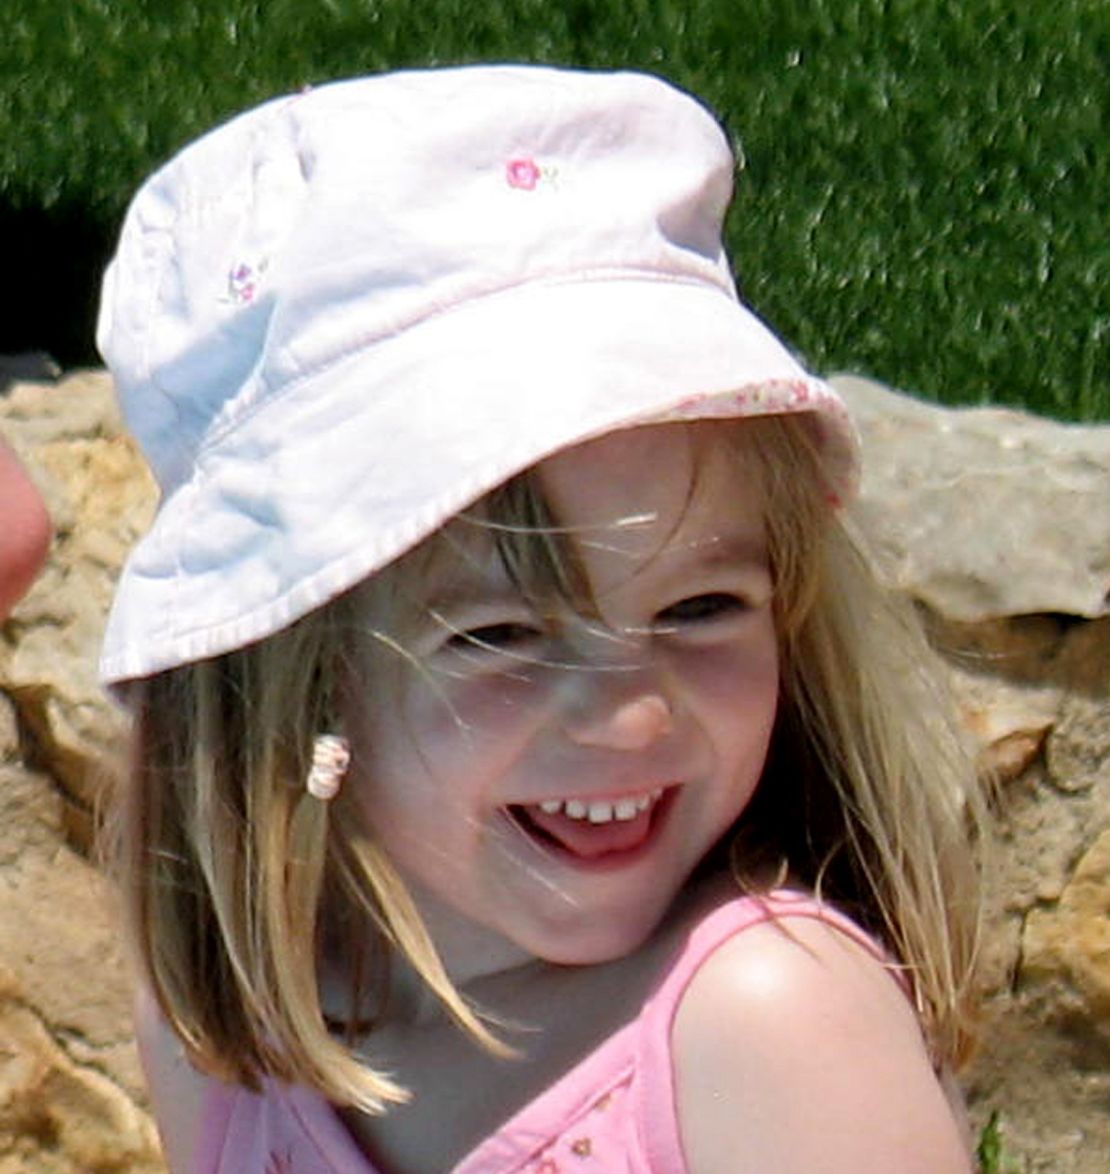 This  picture released by the McCann family shows Madeleine on May 3, 2007, on the same day she went missing.